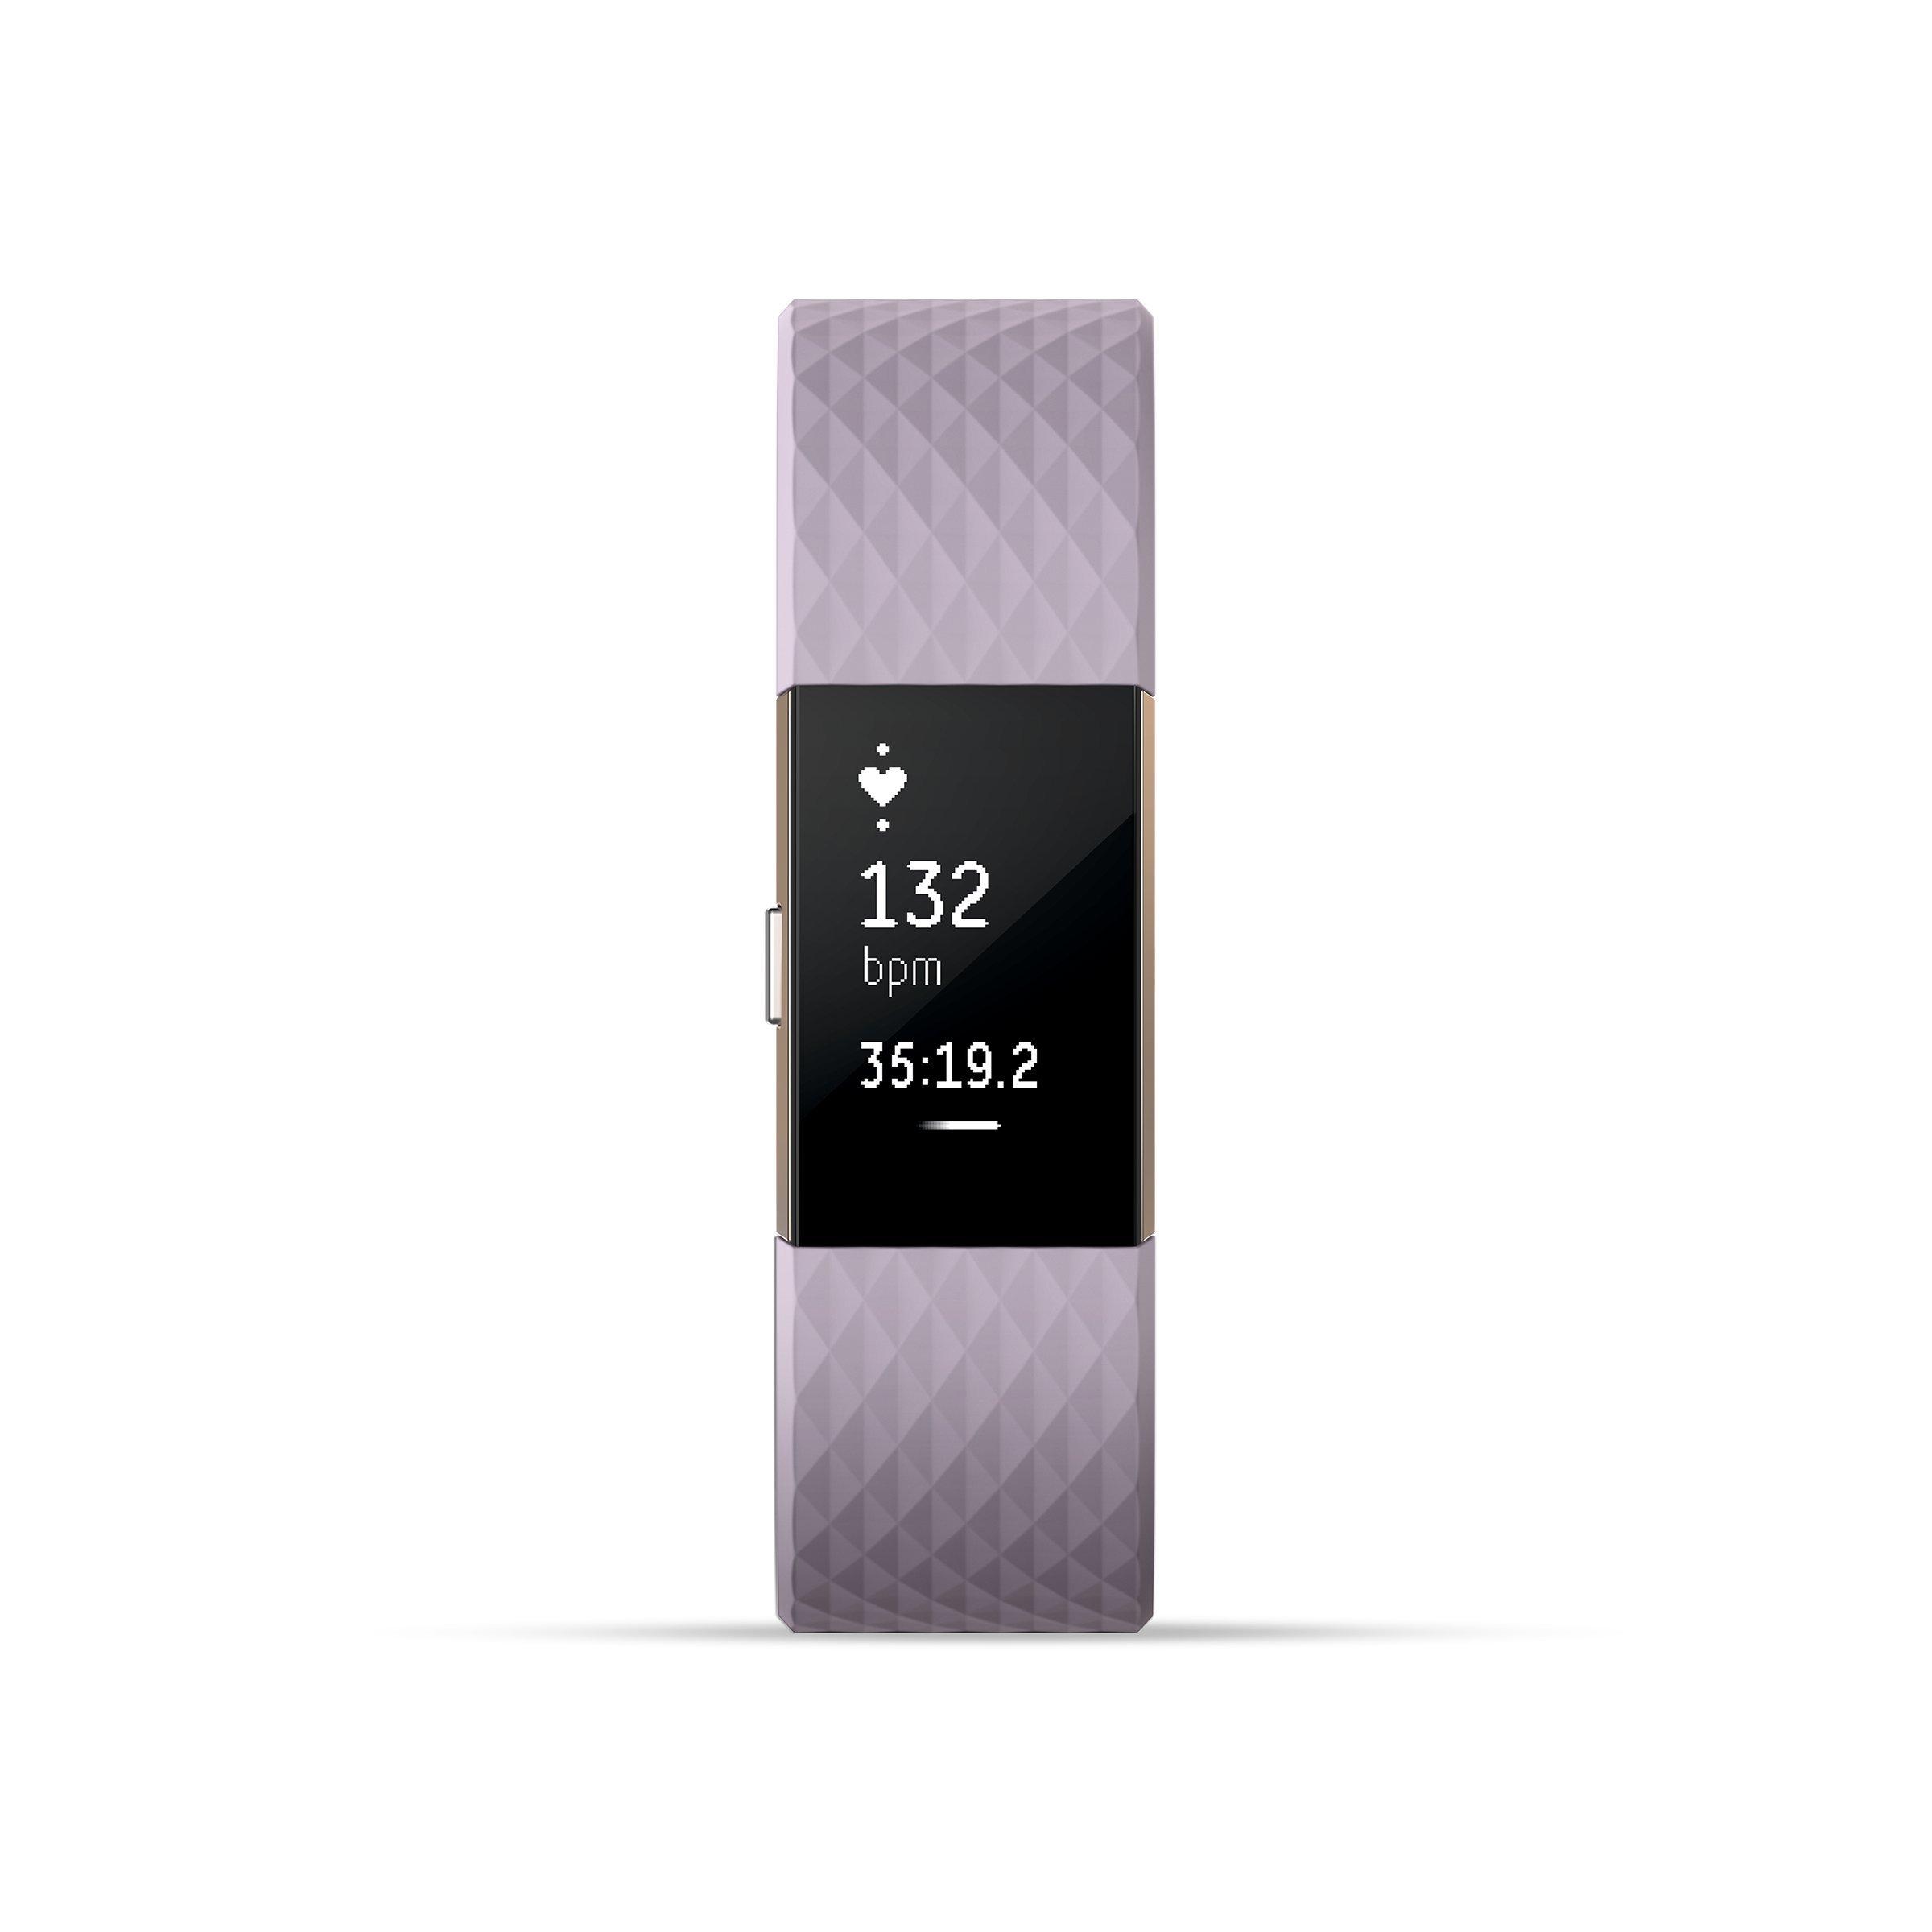 Fitbit Charge 2 Heart Rate + Fitness Wristband, Special Edition, Lavender Rose Gold, Large (US Version)